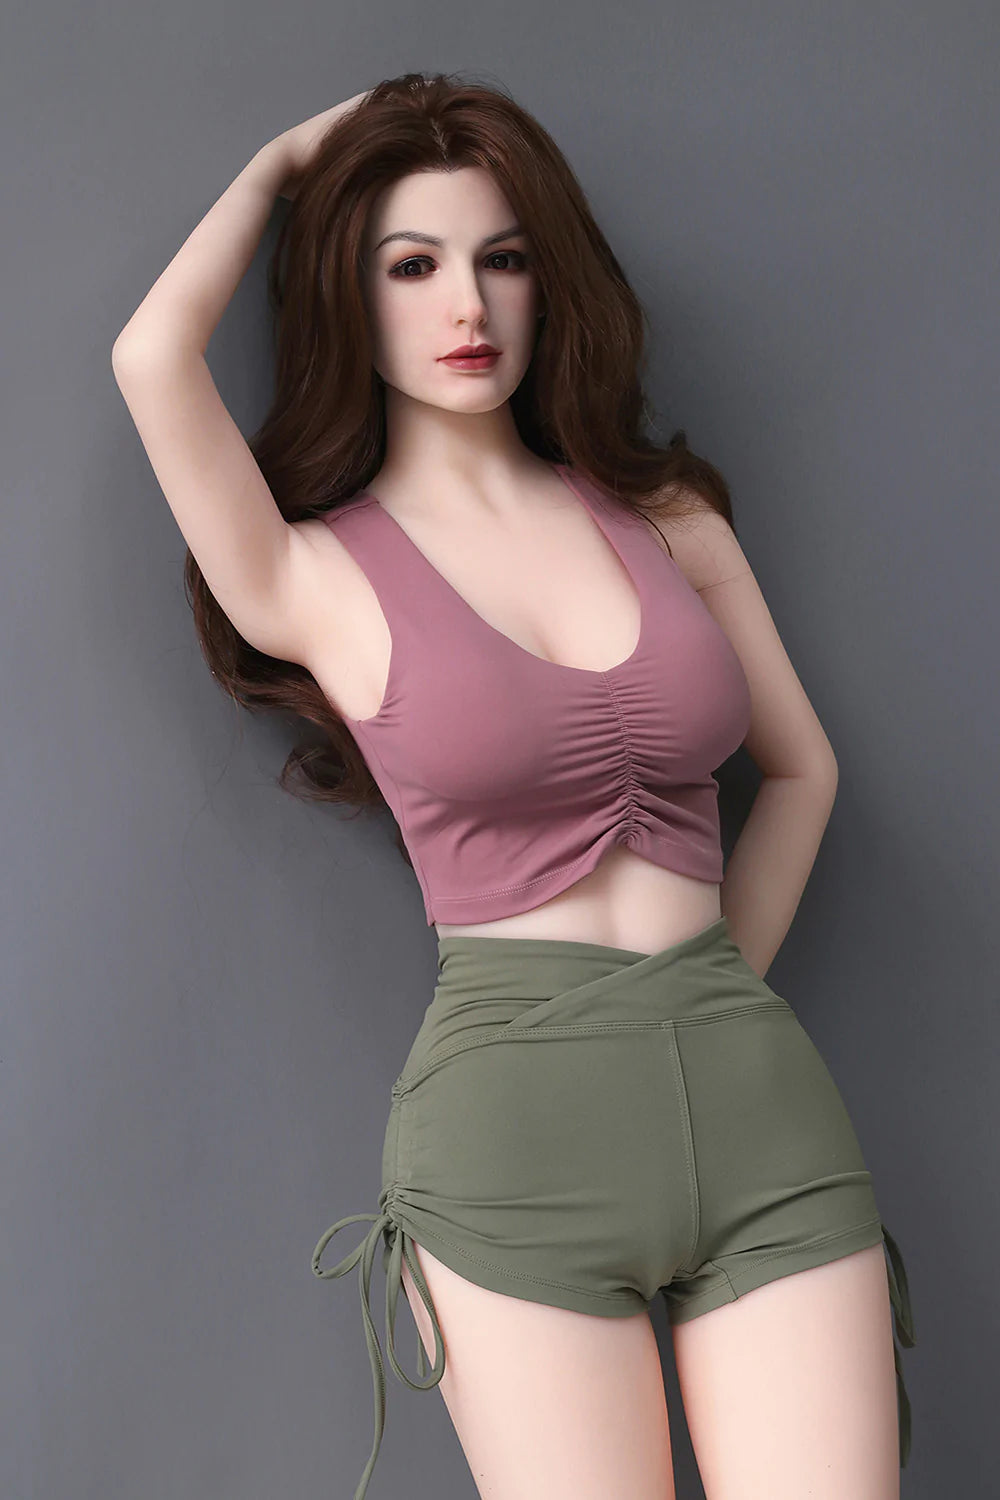 SY Doll | US In Stock-165cm (5' 5") Milf Small Boobs Sex Doll - SuperLoveDoll